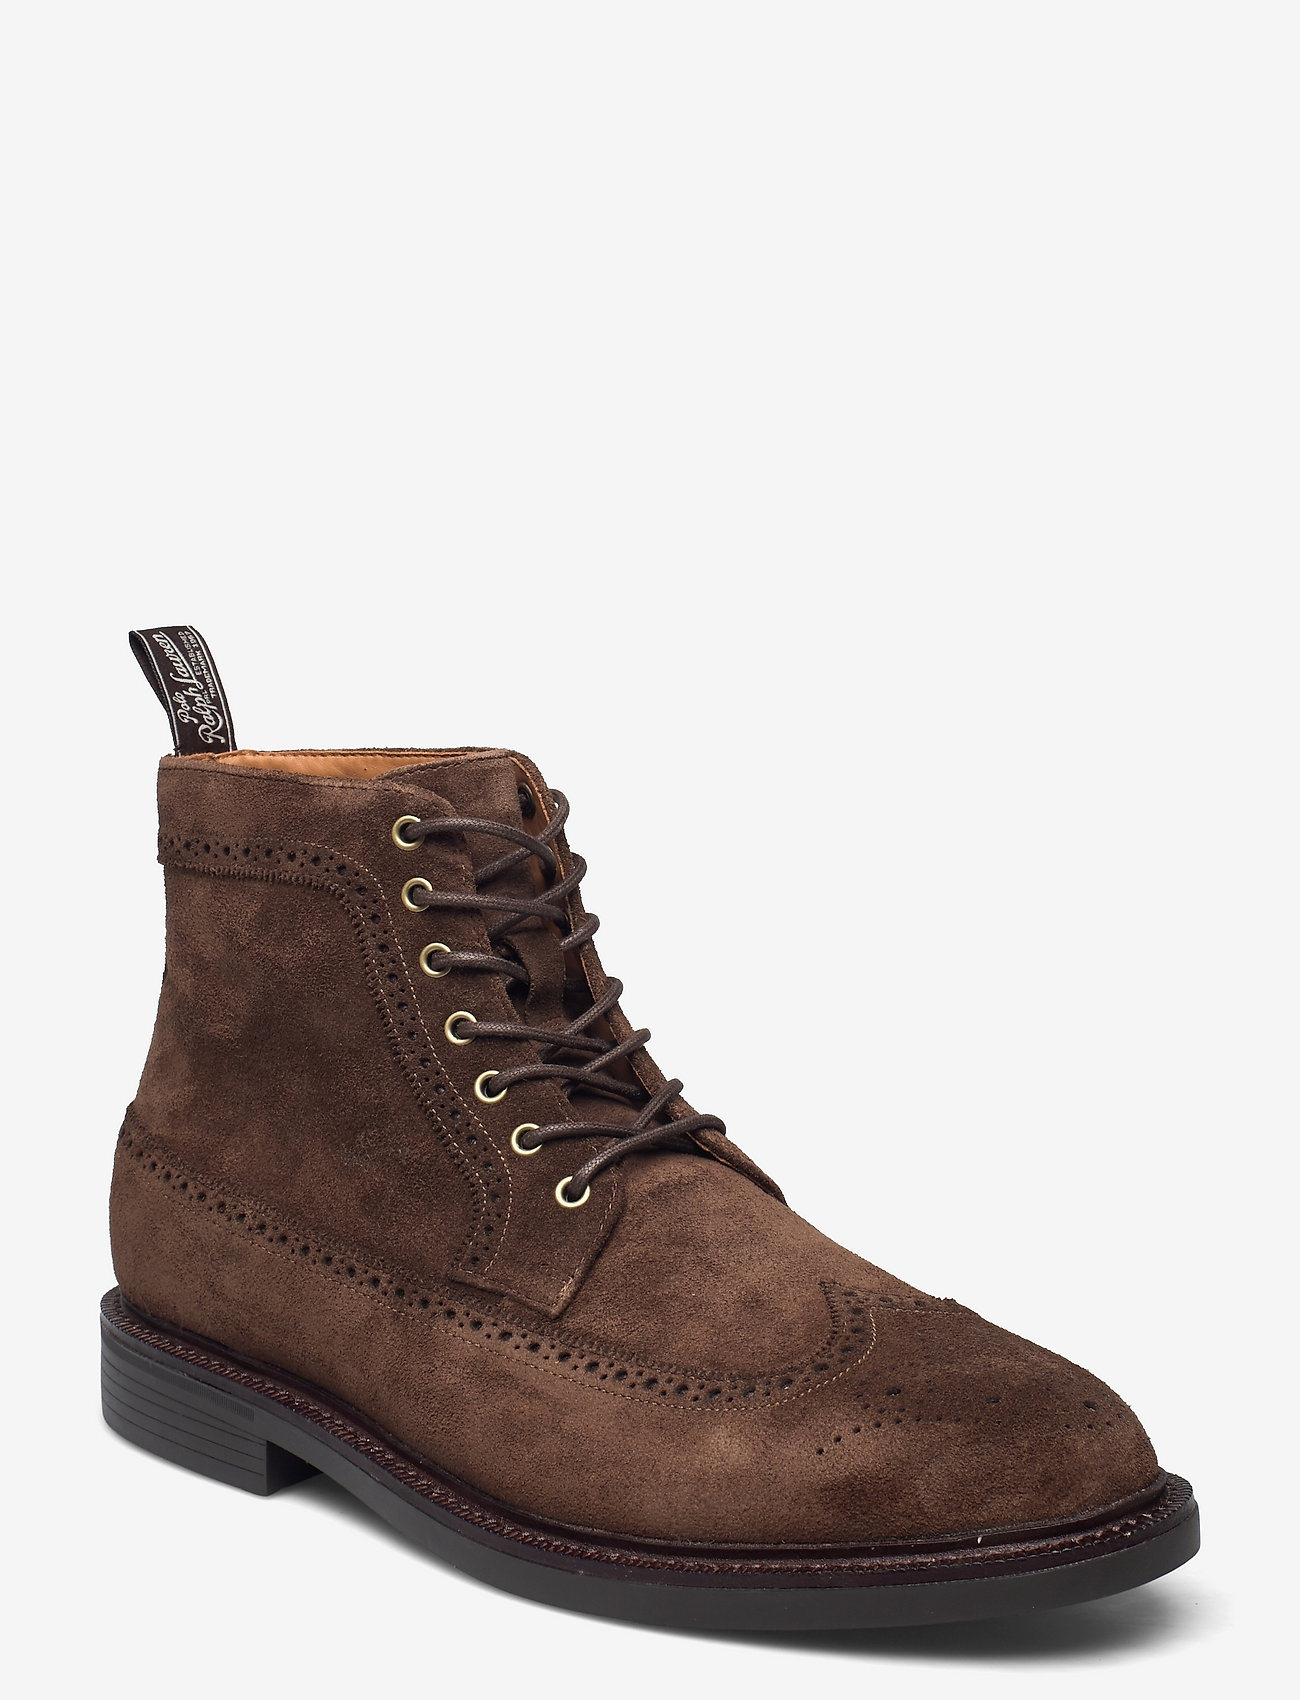 Polo Ralph Lauren - Asher Suede Wingtip Boot - laced boots - chocolate brown - 0